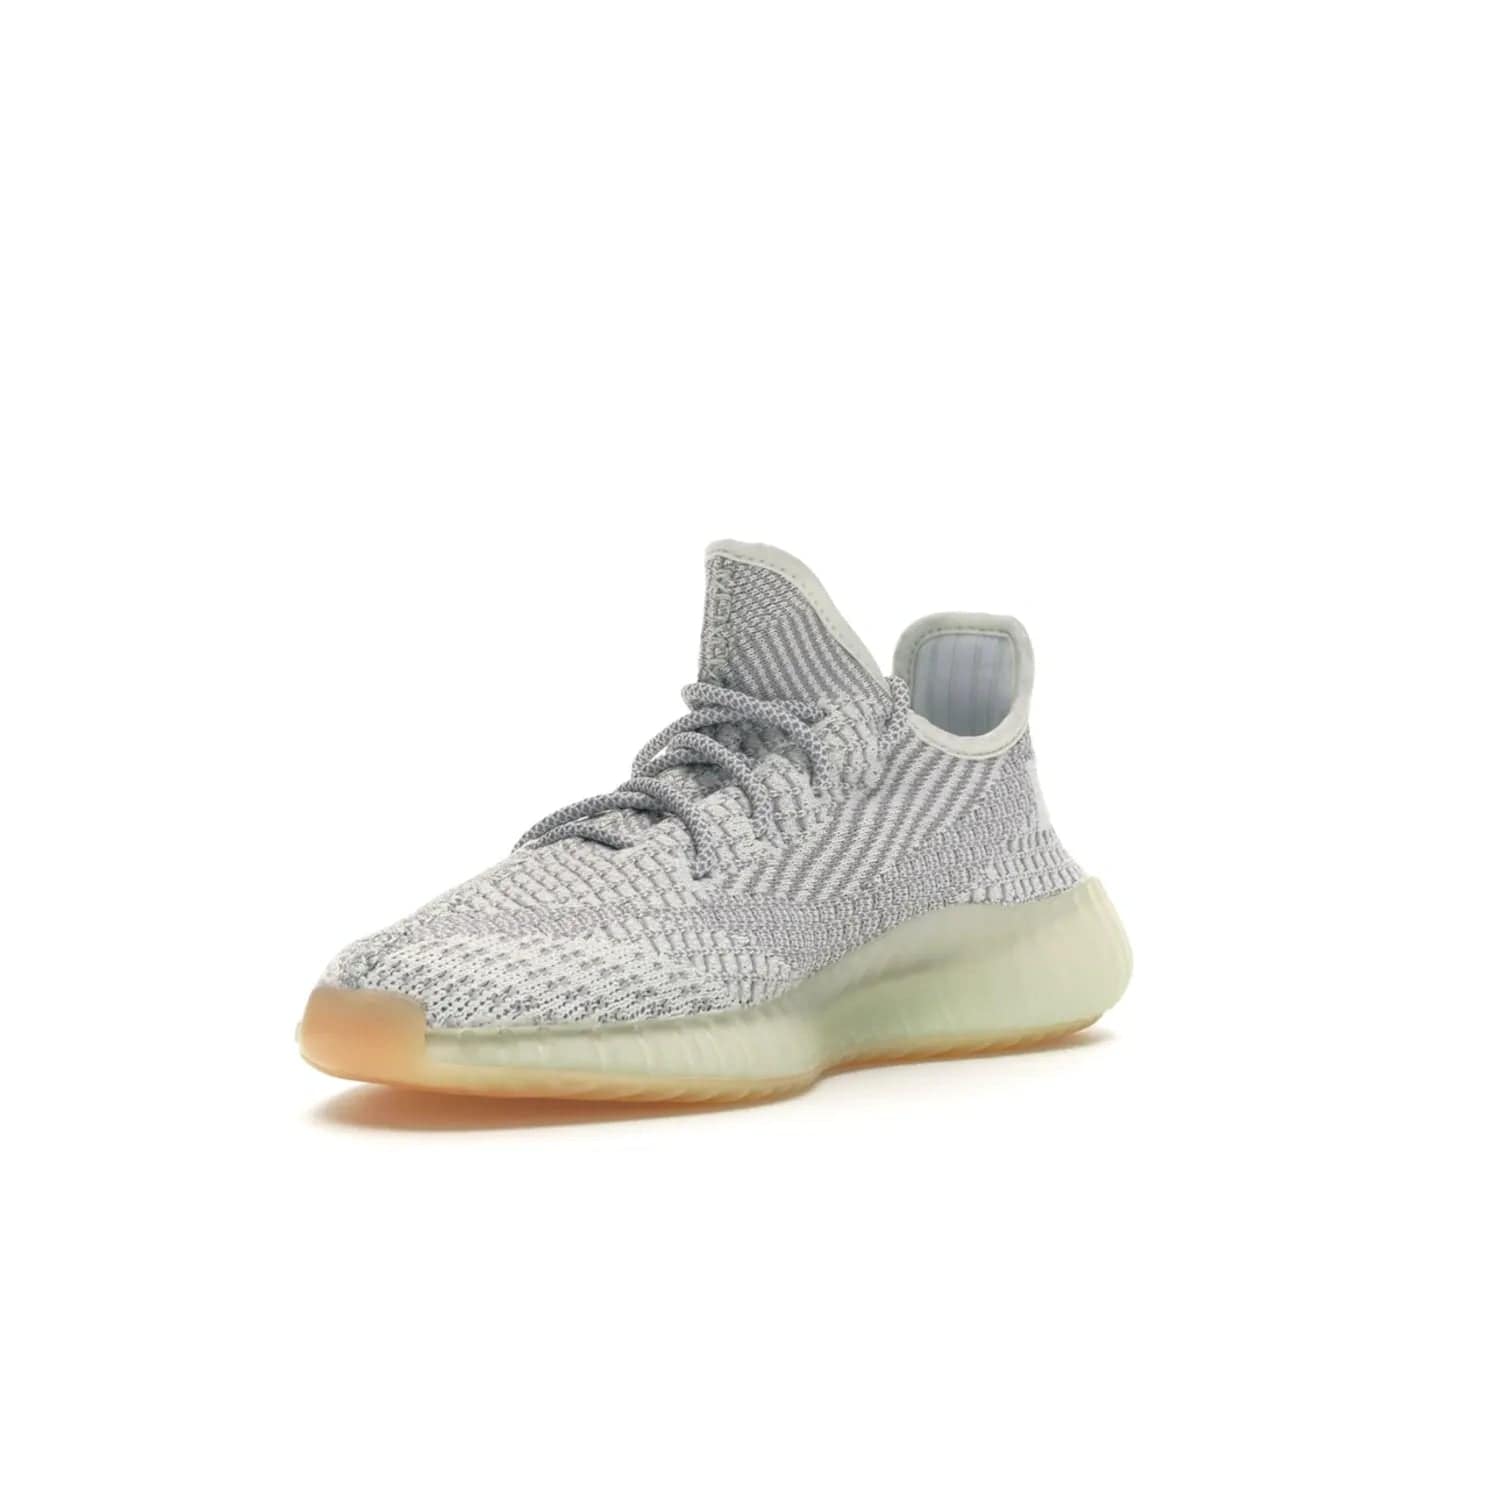 adidas Yeezy Boost 350 V2 Yeshaya (Non-Reflective) - Image 14 - Only at www.BallersClubKickz.com - Step out in style with the adidas Yeezy Boost 350 V2 Yeshaya (Non-Reflective). Gray-and-white Primeknit upper with mesh side stripe & rope laces, plus a translucent Boost sole with a hint of yellow. Make a statement and feel comfortable with this stylish sneaker.